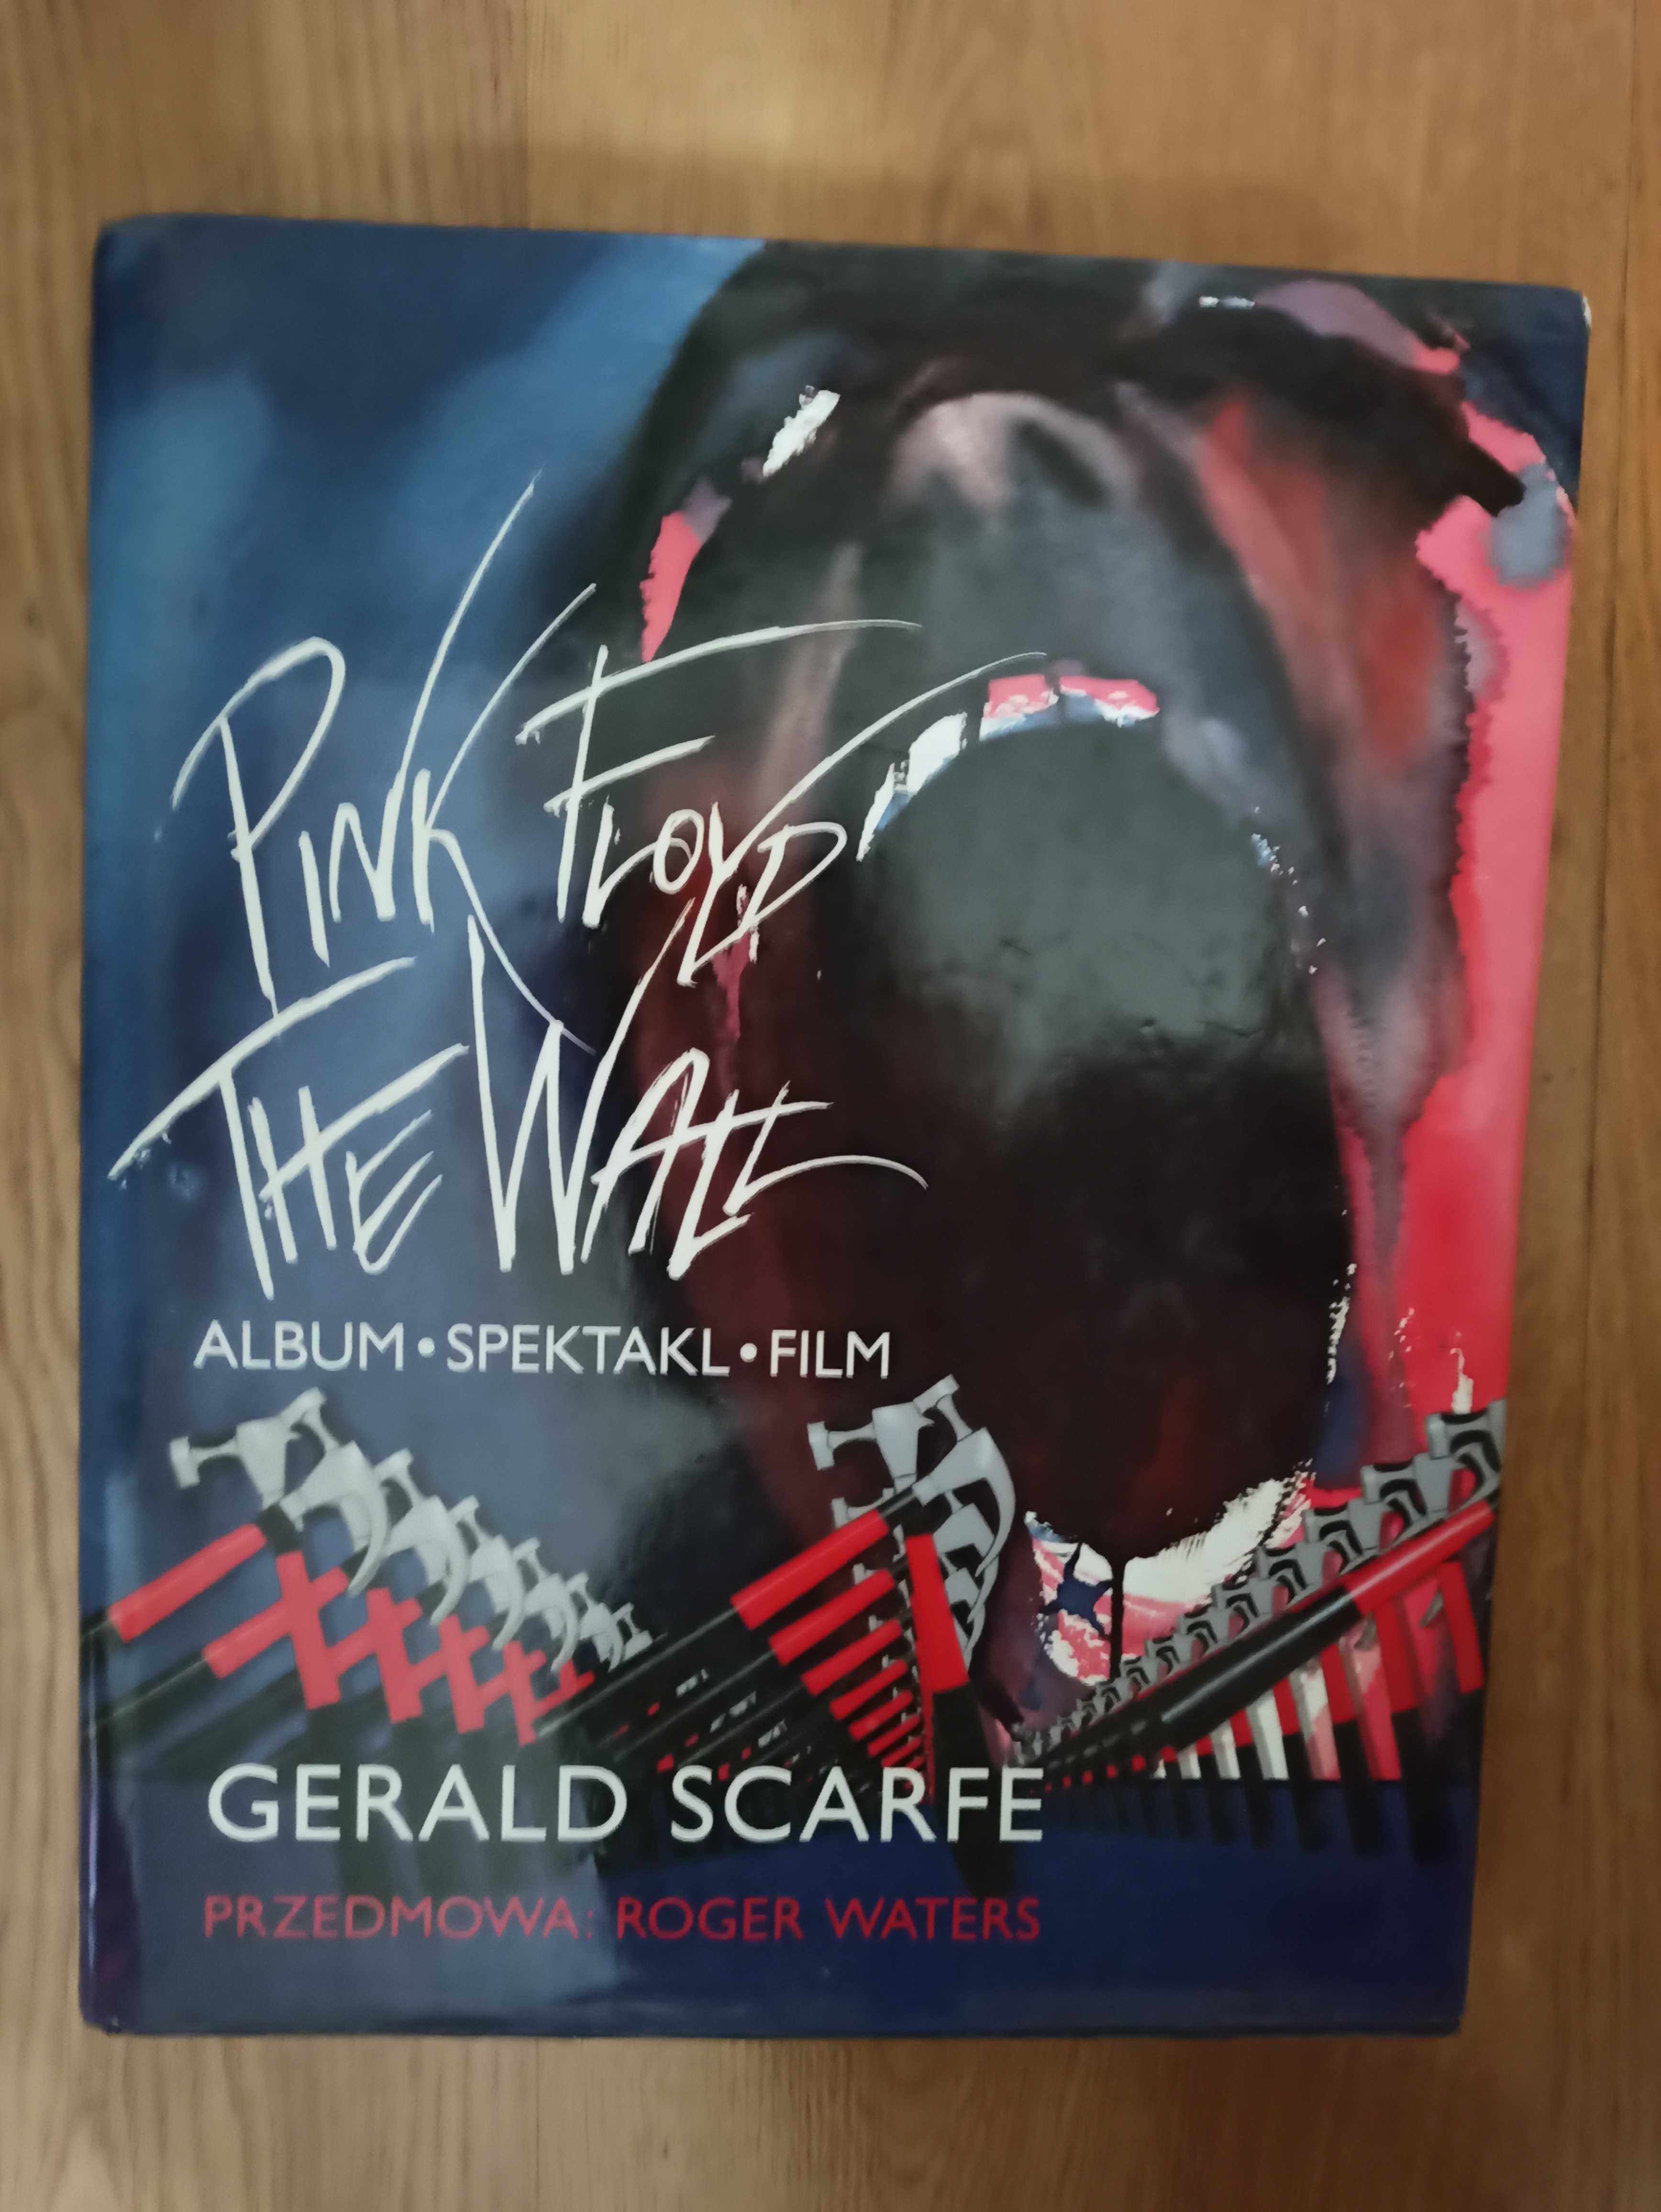 Gerald Scarfe

The Making of Pink Floyd The Wall